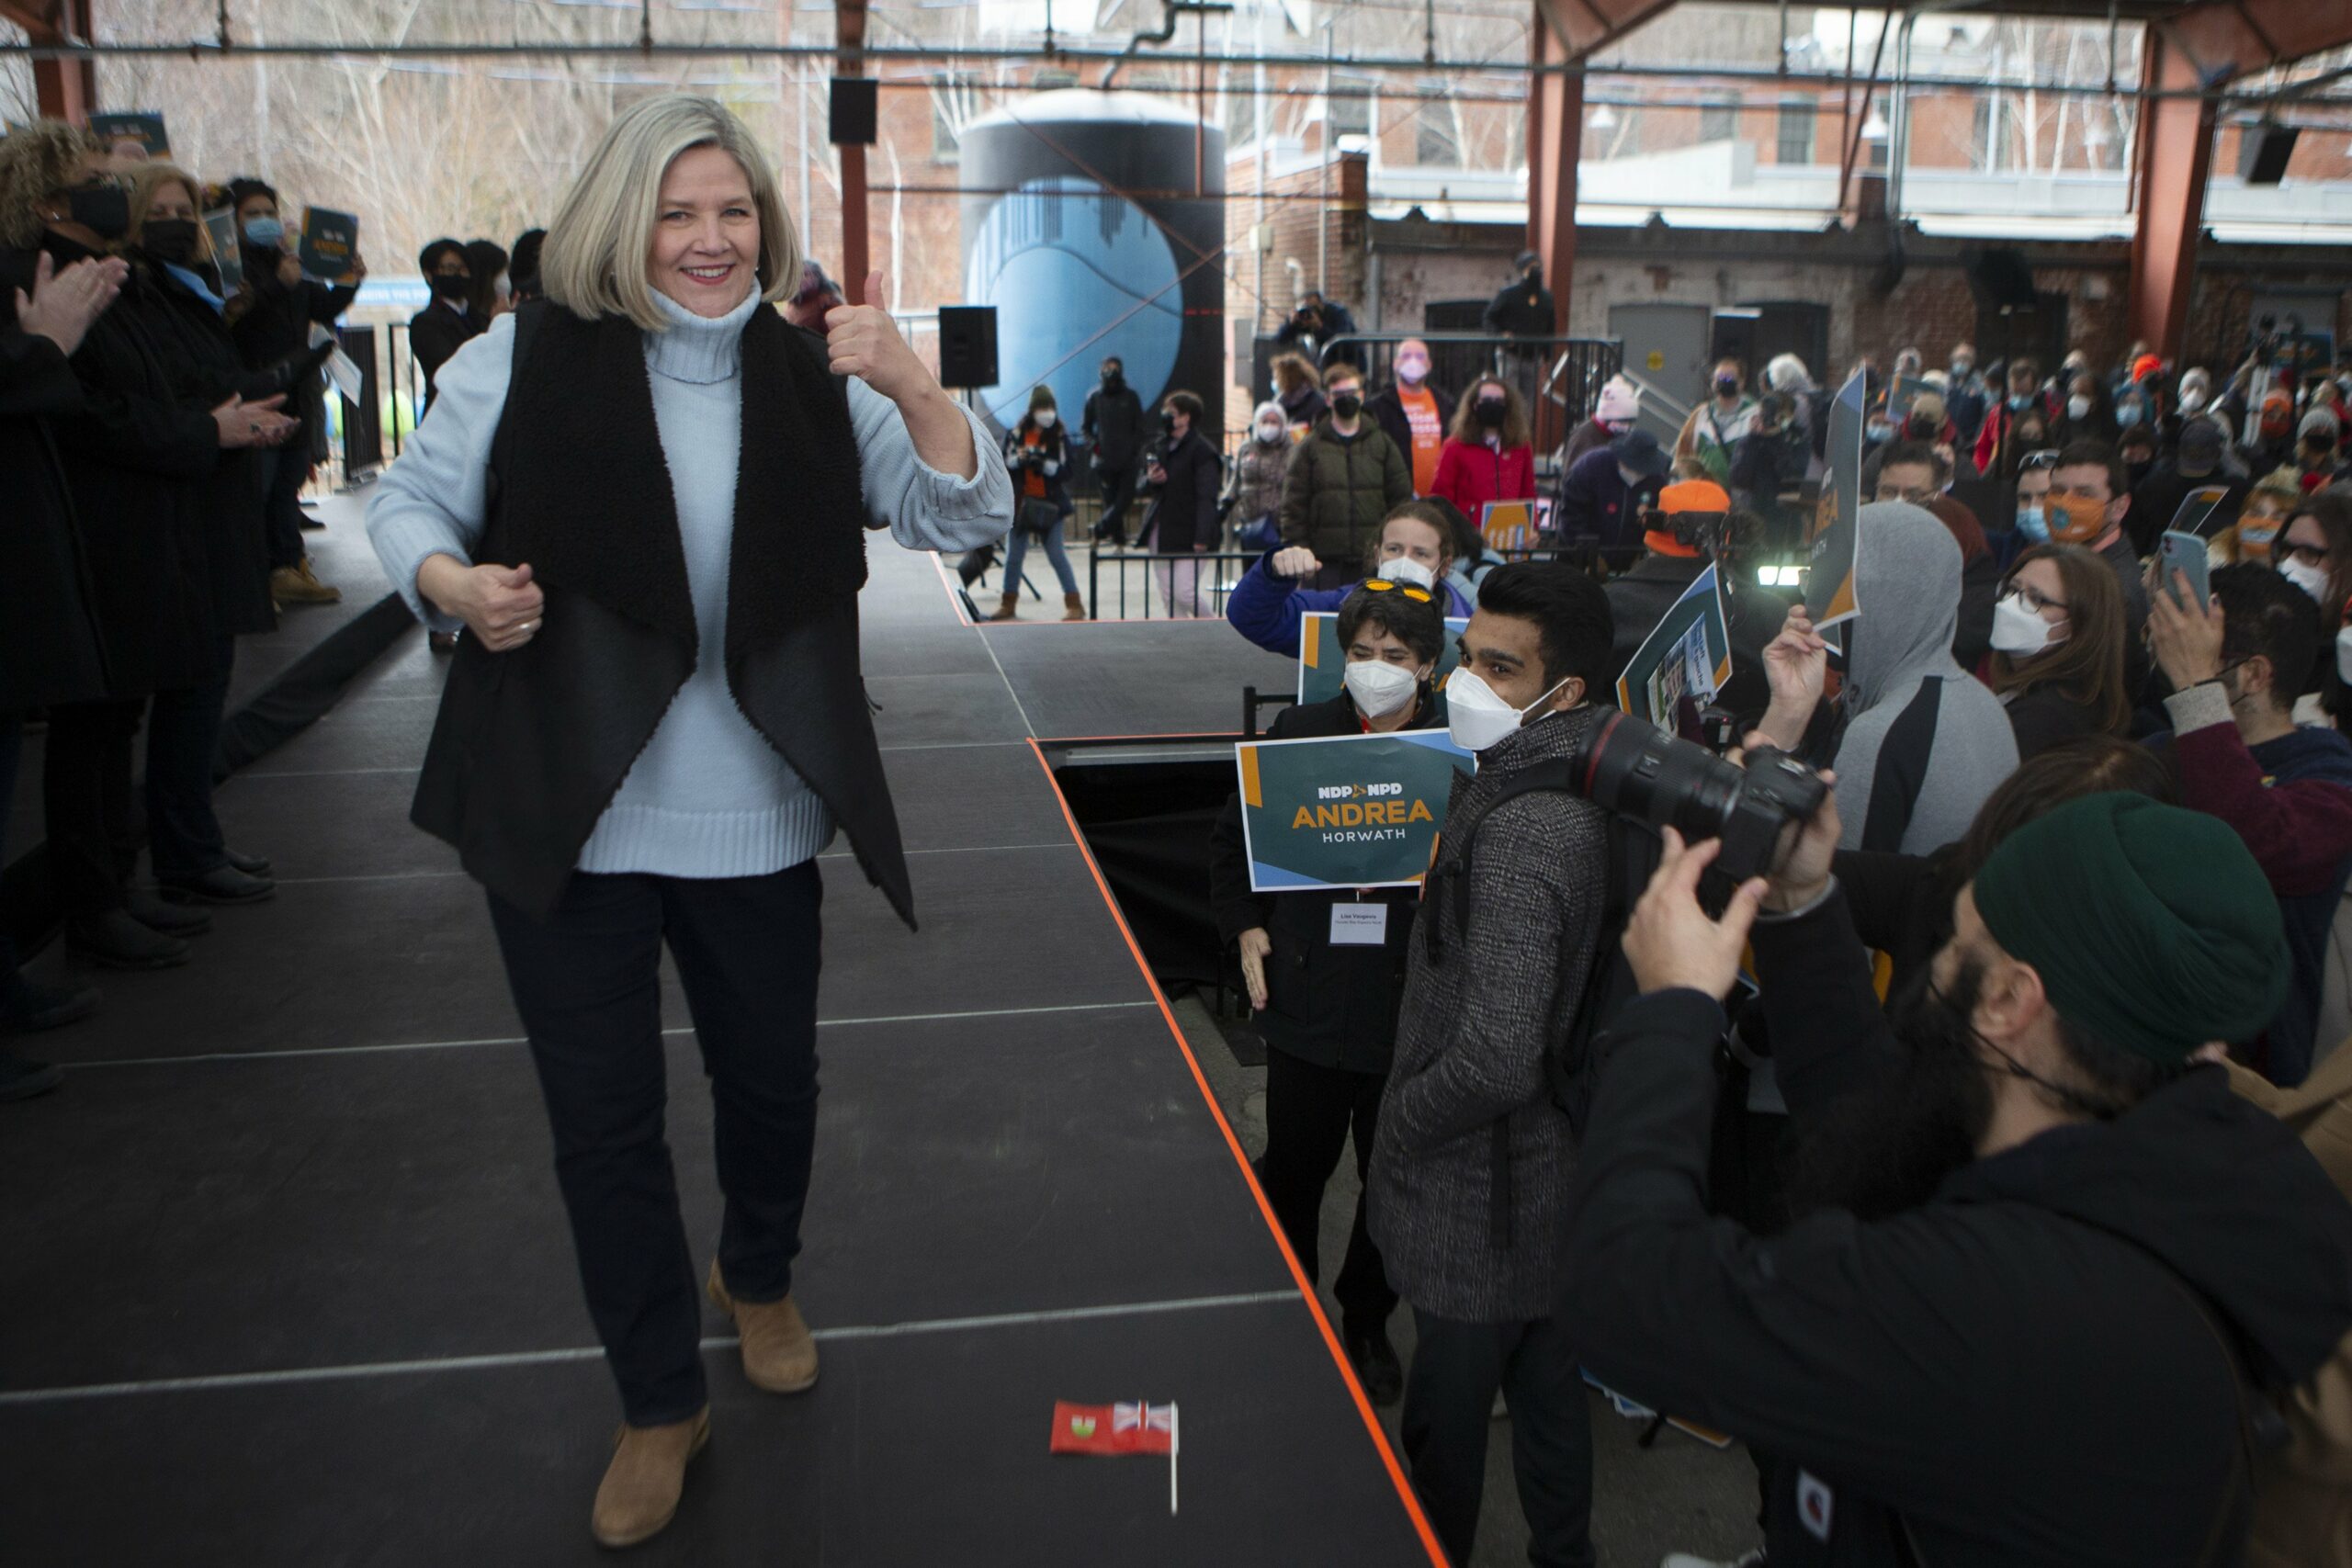 Grounded in the home stretch, Horwath sticks to NDP-or-bust message